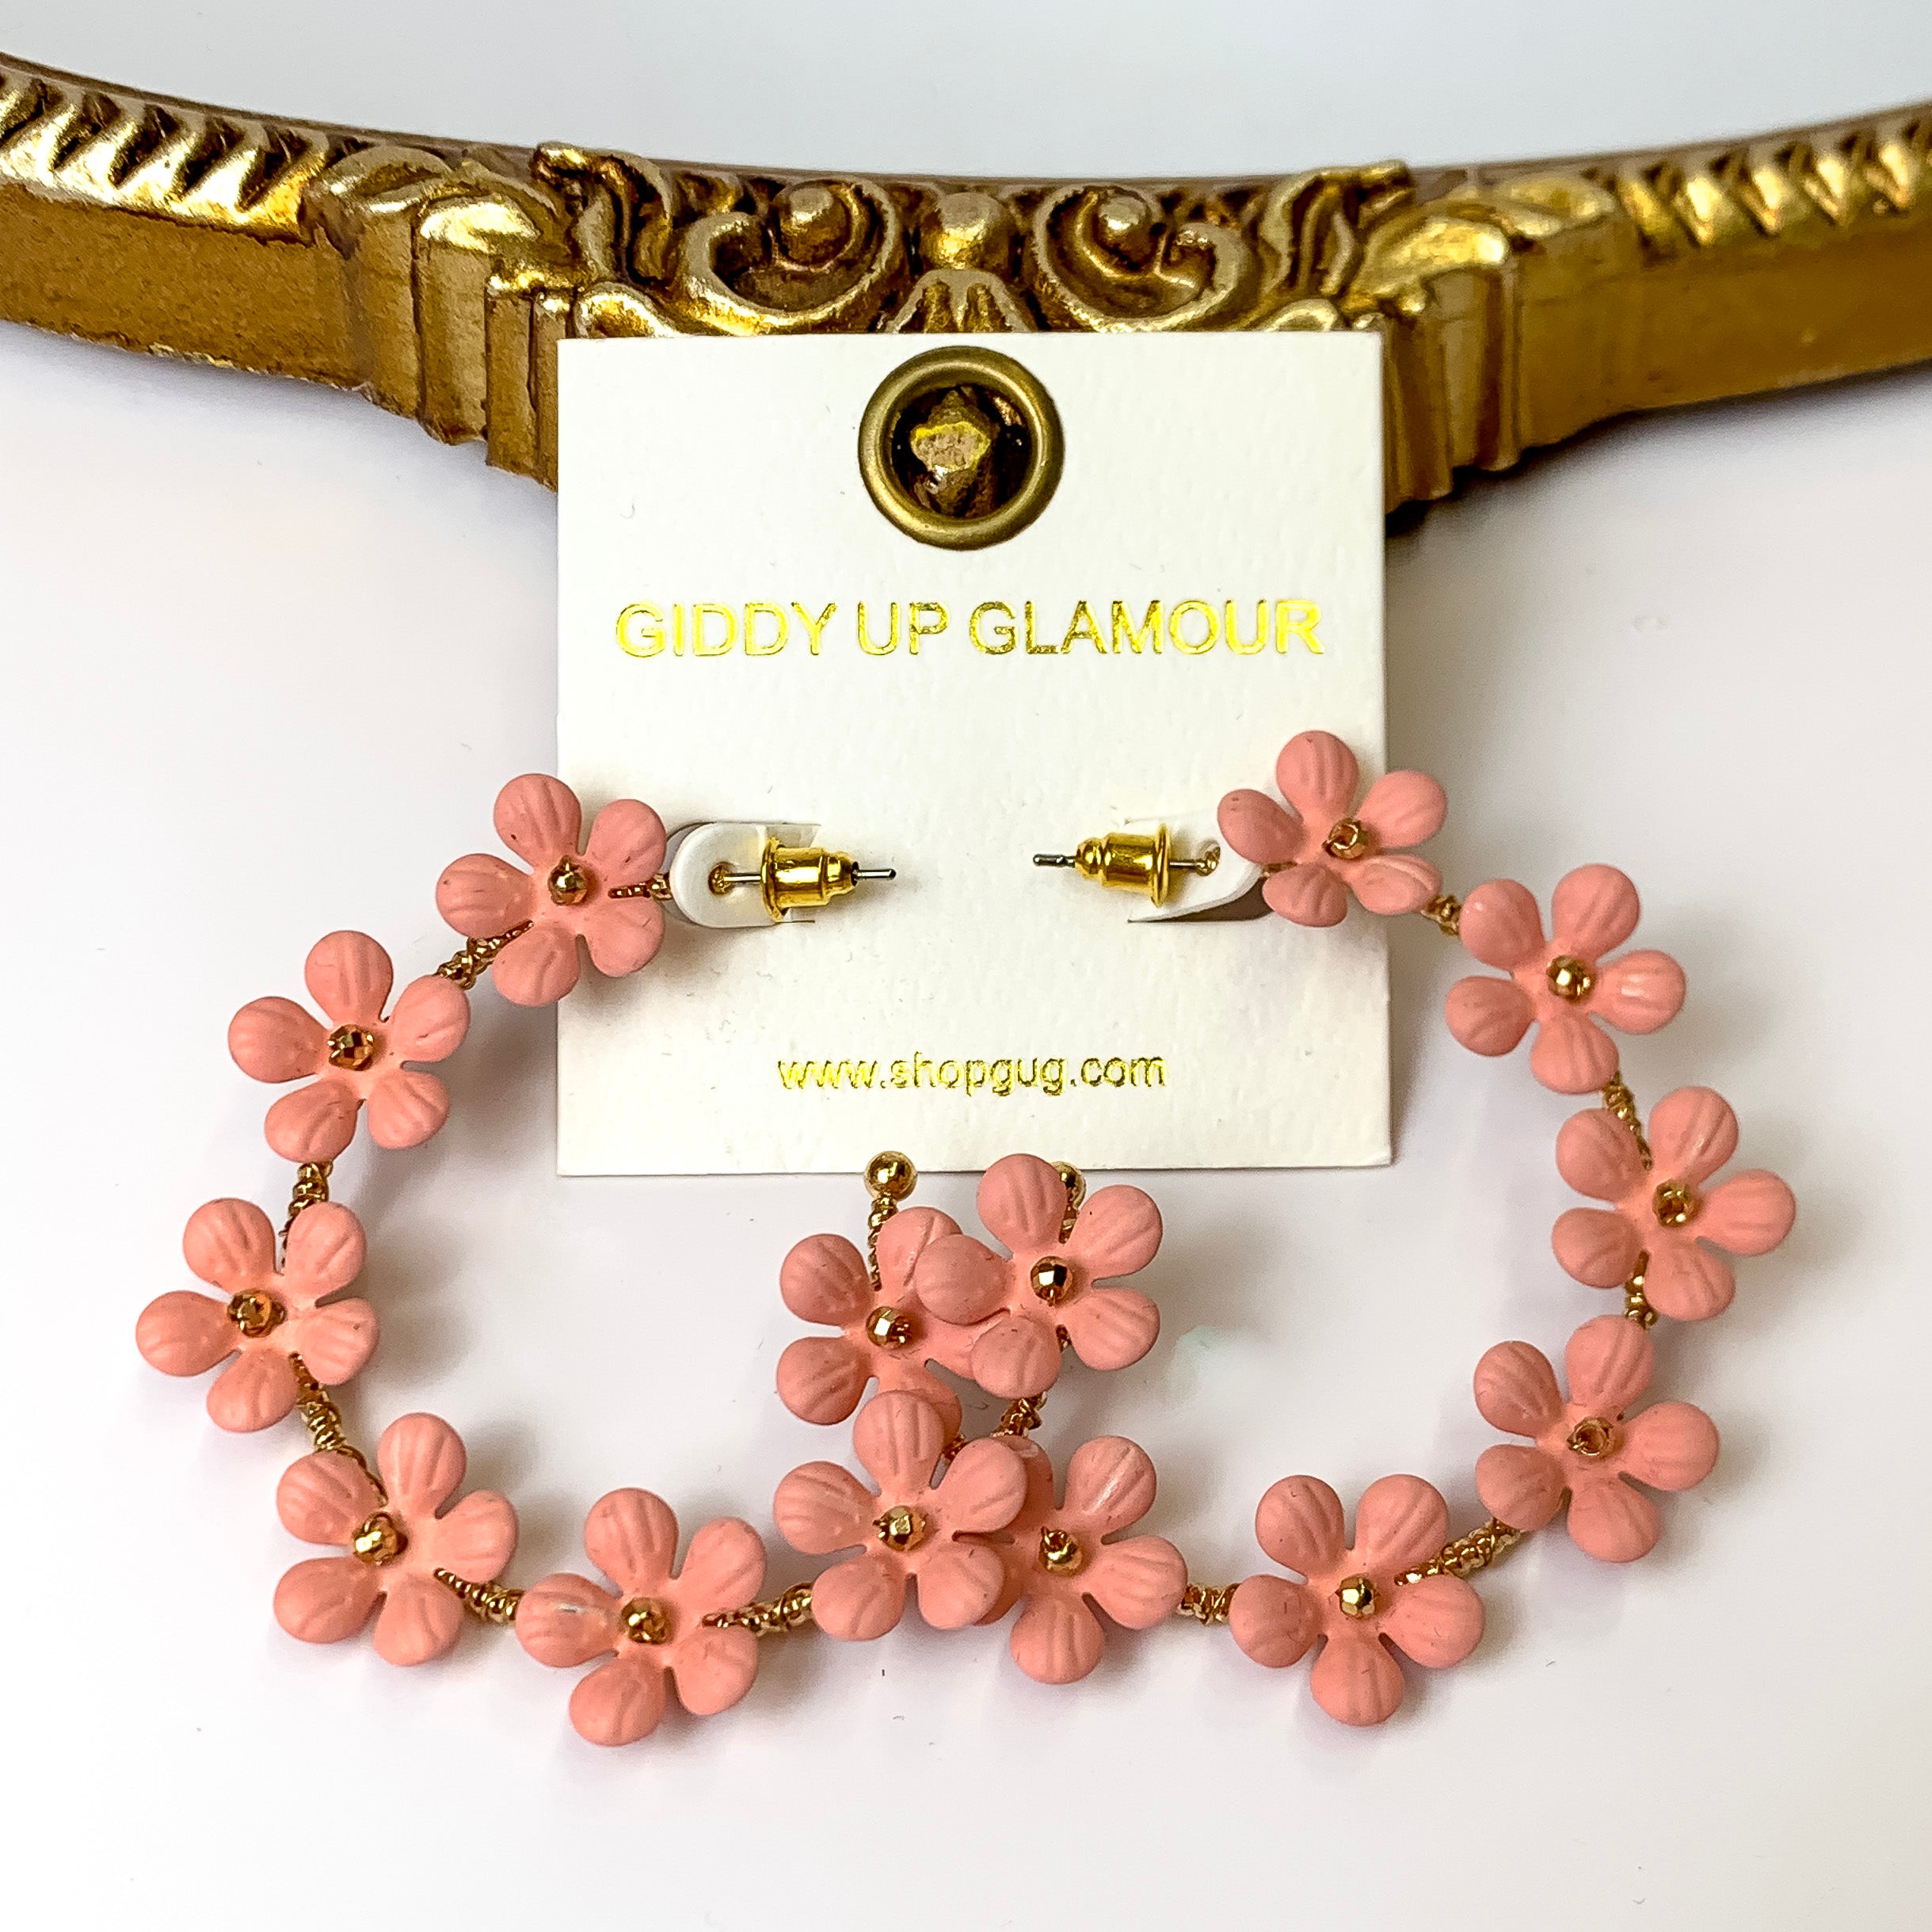 Market Flowers Gold Tone Hoop Earrings with Flower Charms in Coral Pink - Giddy Up Glamour Boutique